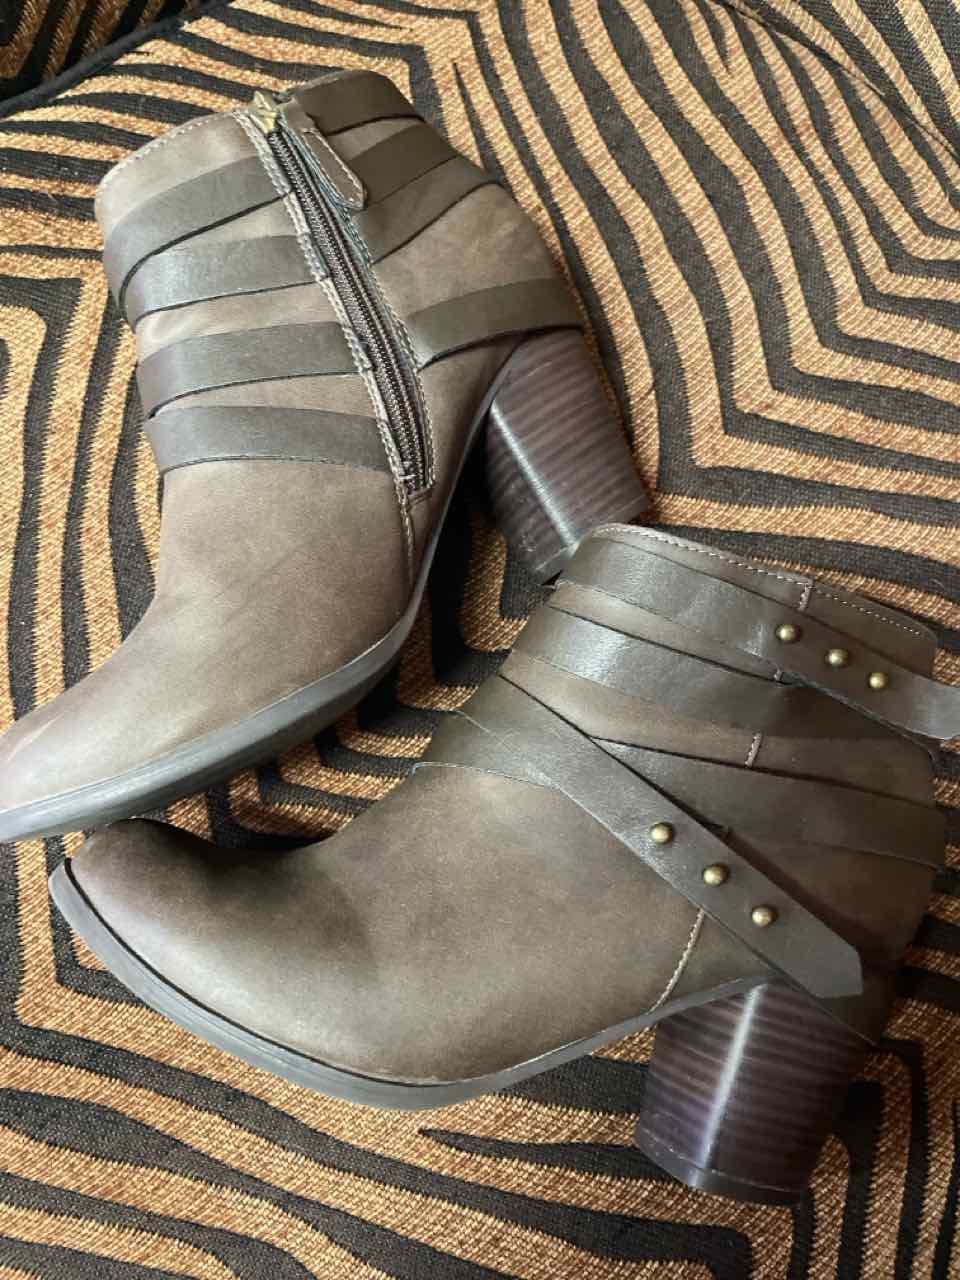 8 - Mossimo Boots